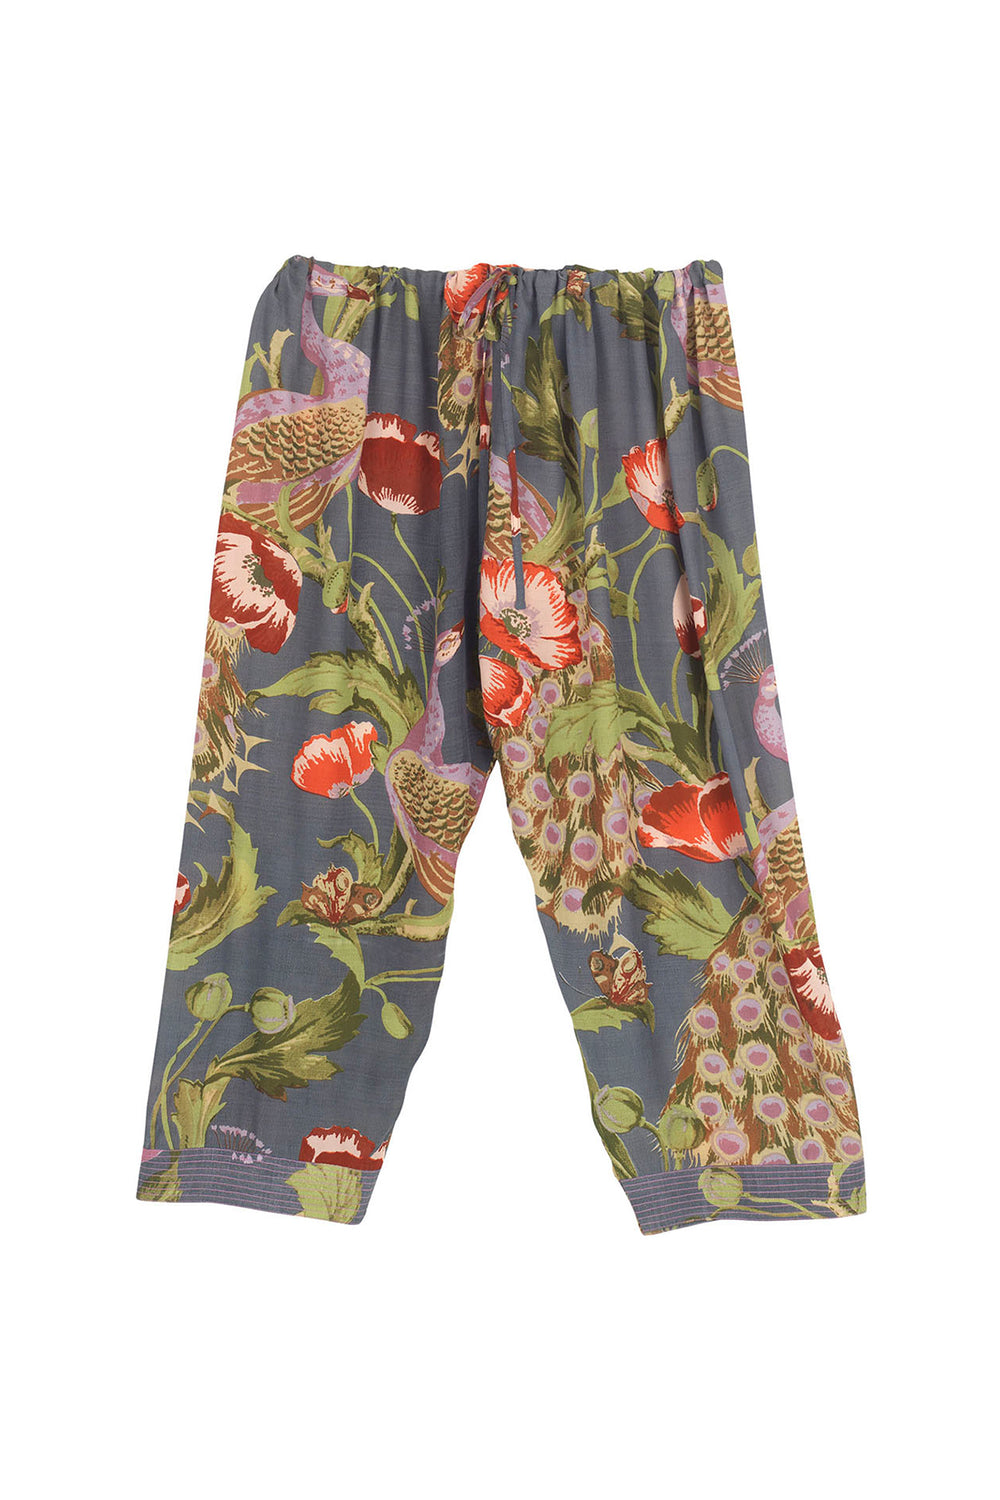 Peacock and Poppies Grey Lounge Pants - One Hundred Stars